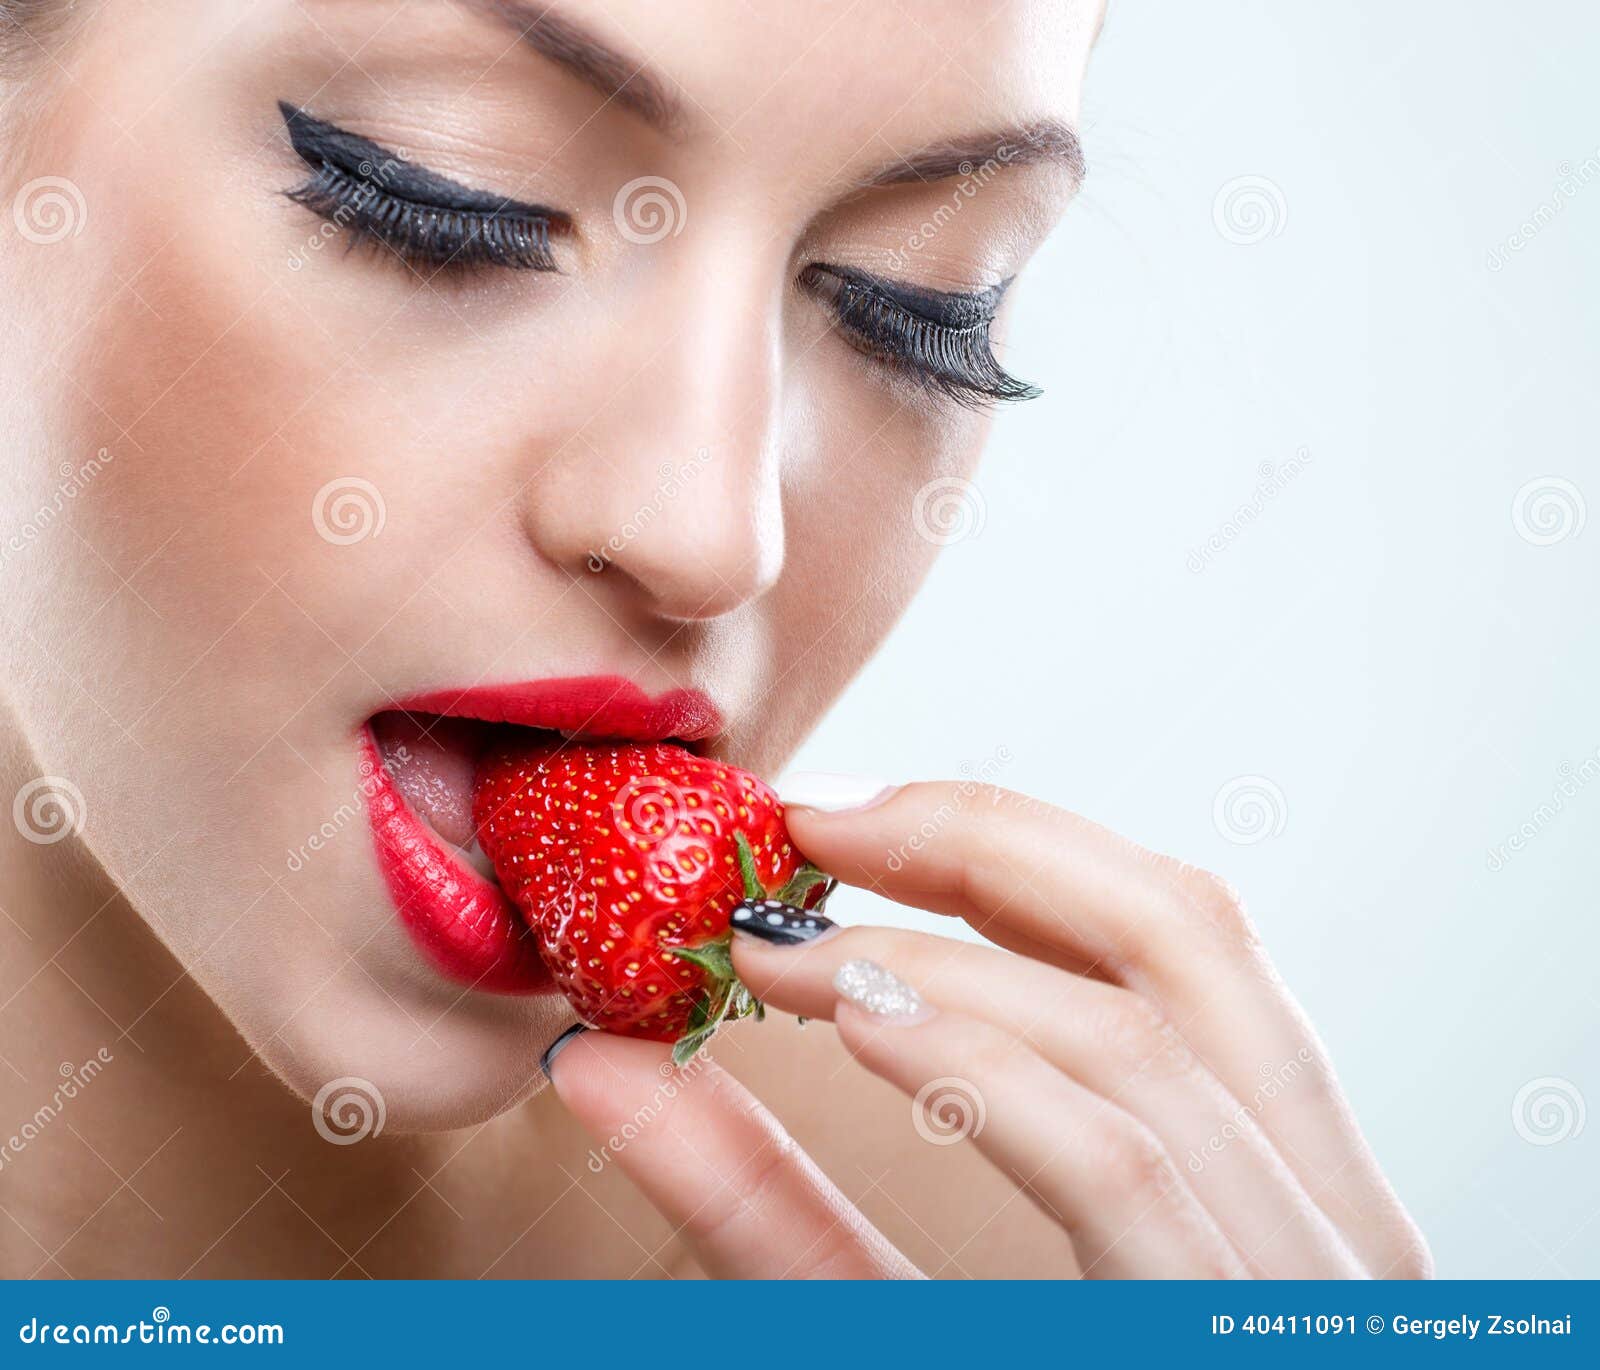 seduction - beautiful woman when closed eyes, take a bite of the strawberry